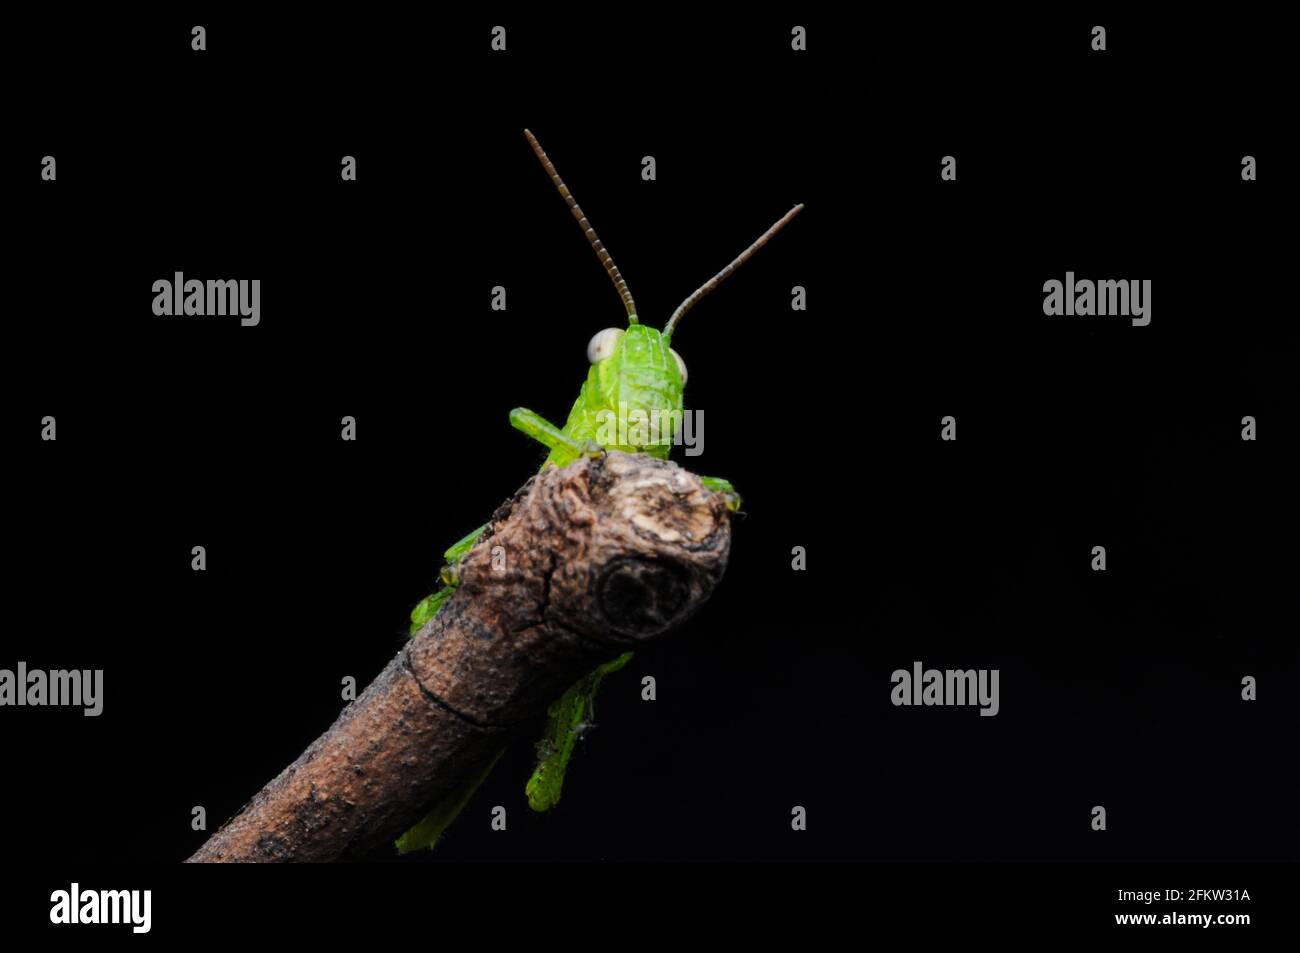 Green grasshopper hanging on the wood on a black background Stock Photo